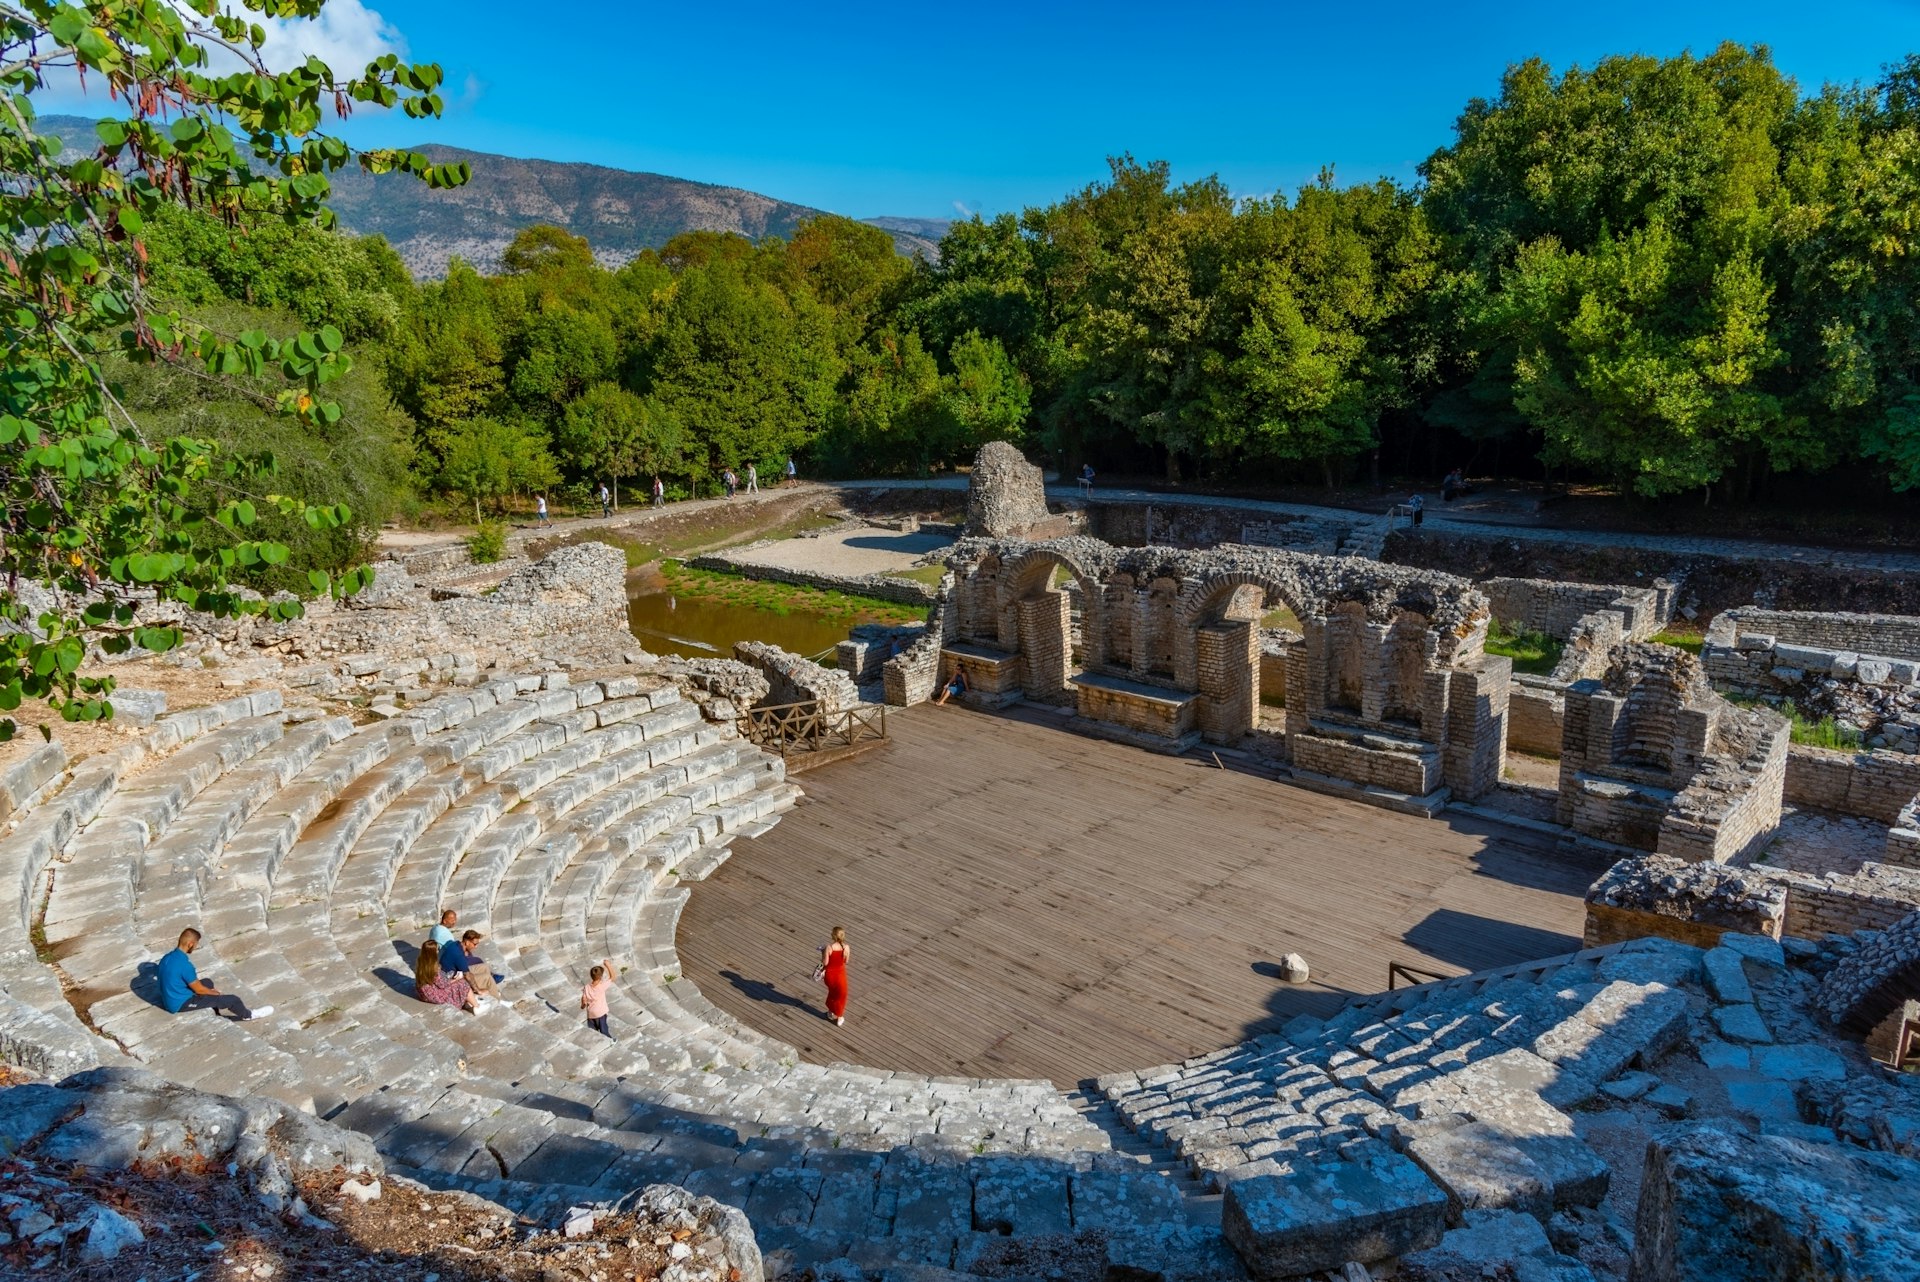 A Roman amphitheater with a handful of tourists admiring the architecture